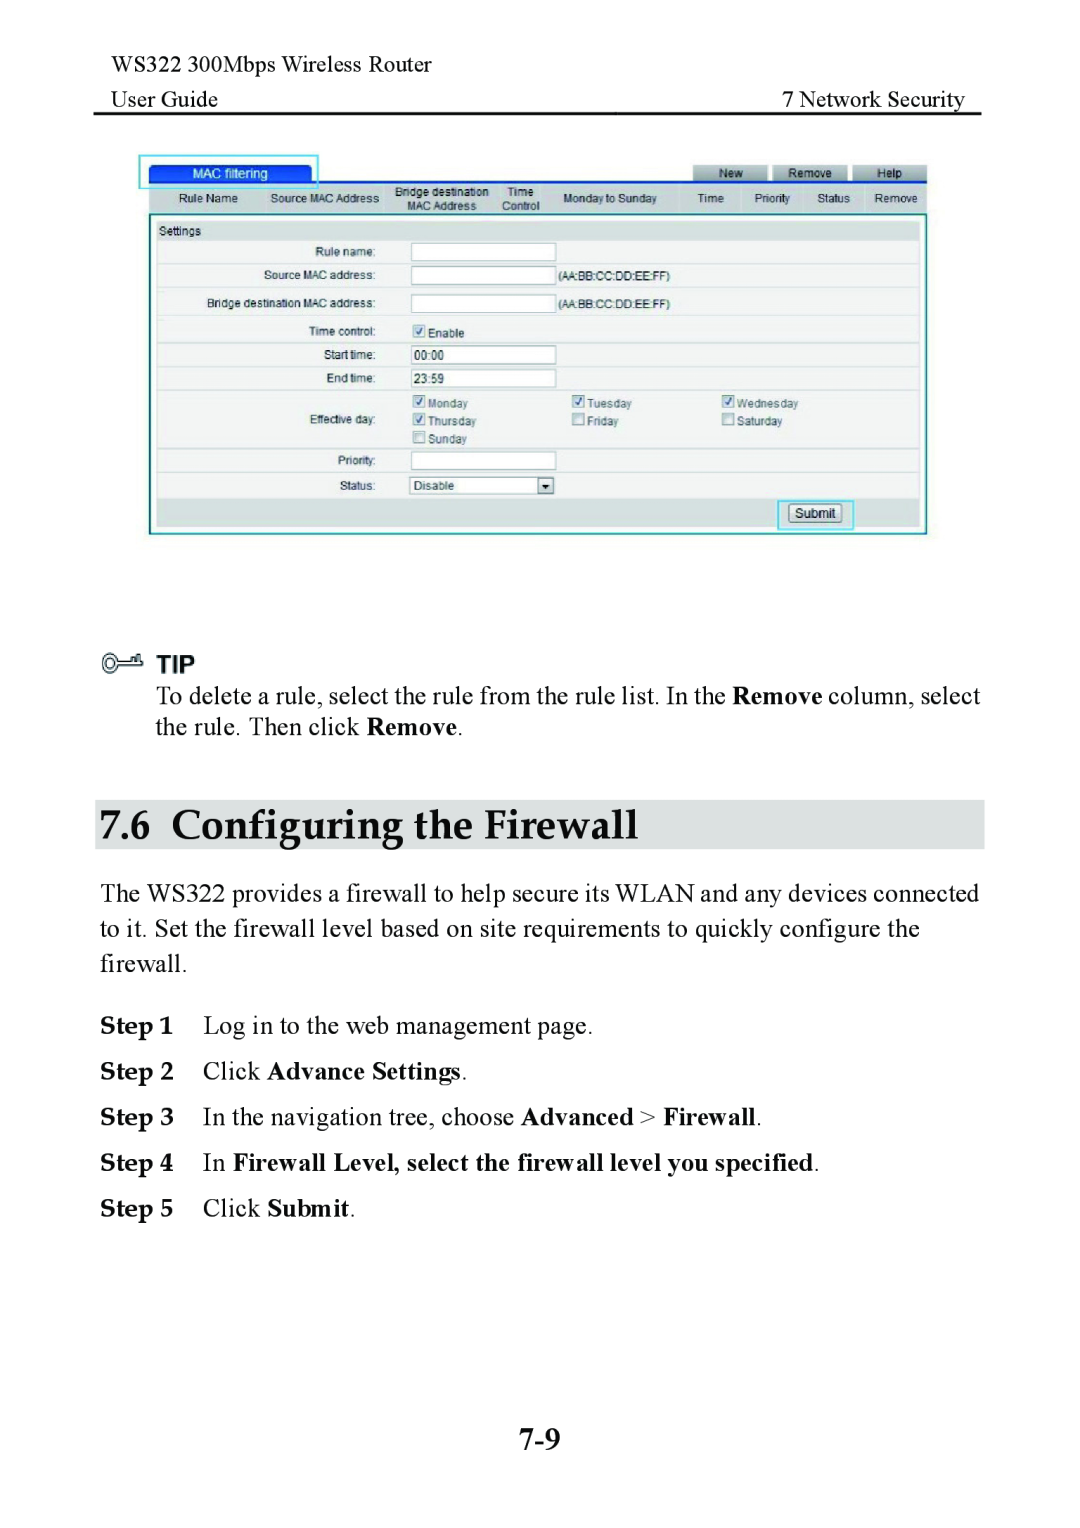 Huawei WS322 Configuring the Firewall, Click Advance Settings, In Firewall Level, select the firewall level you specified 